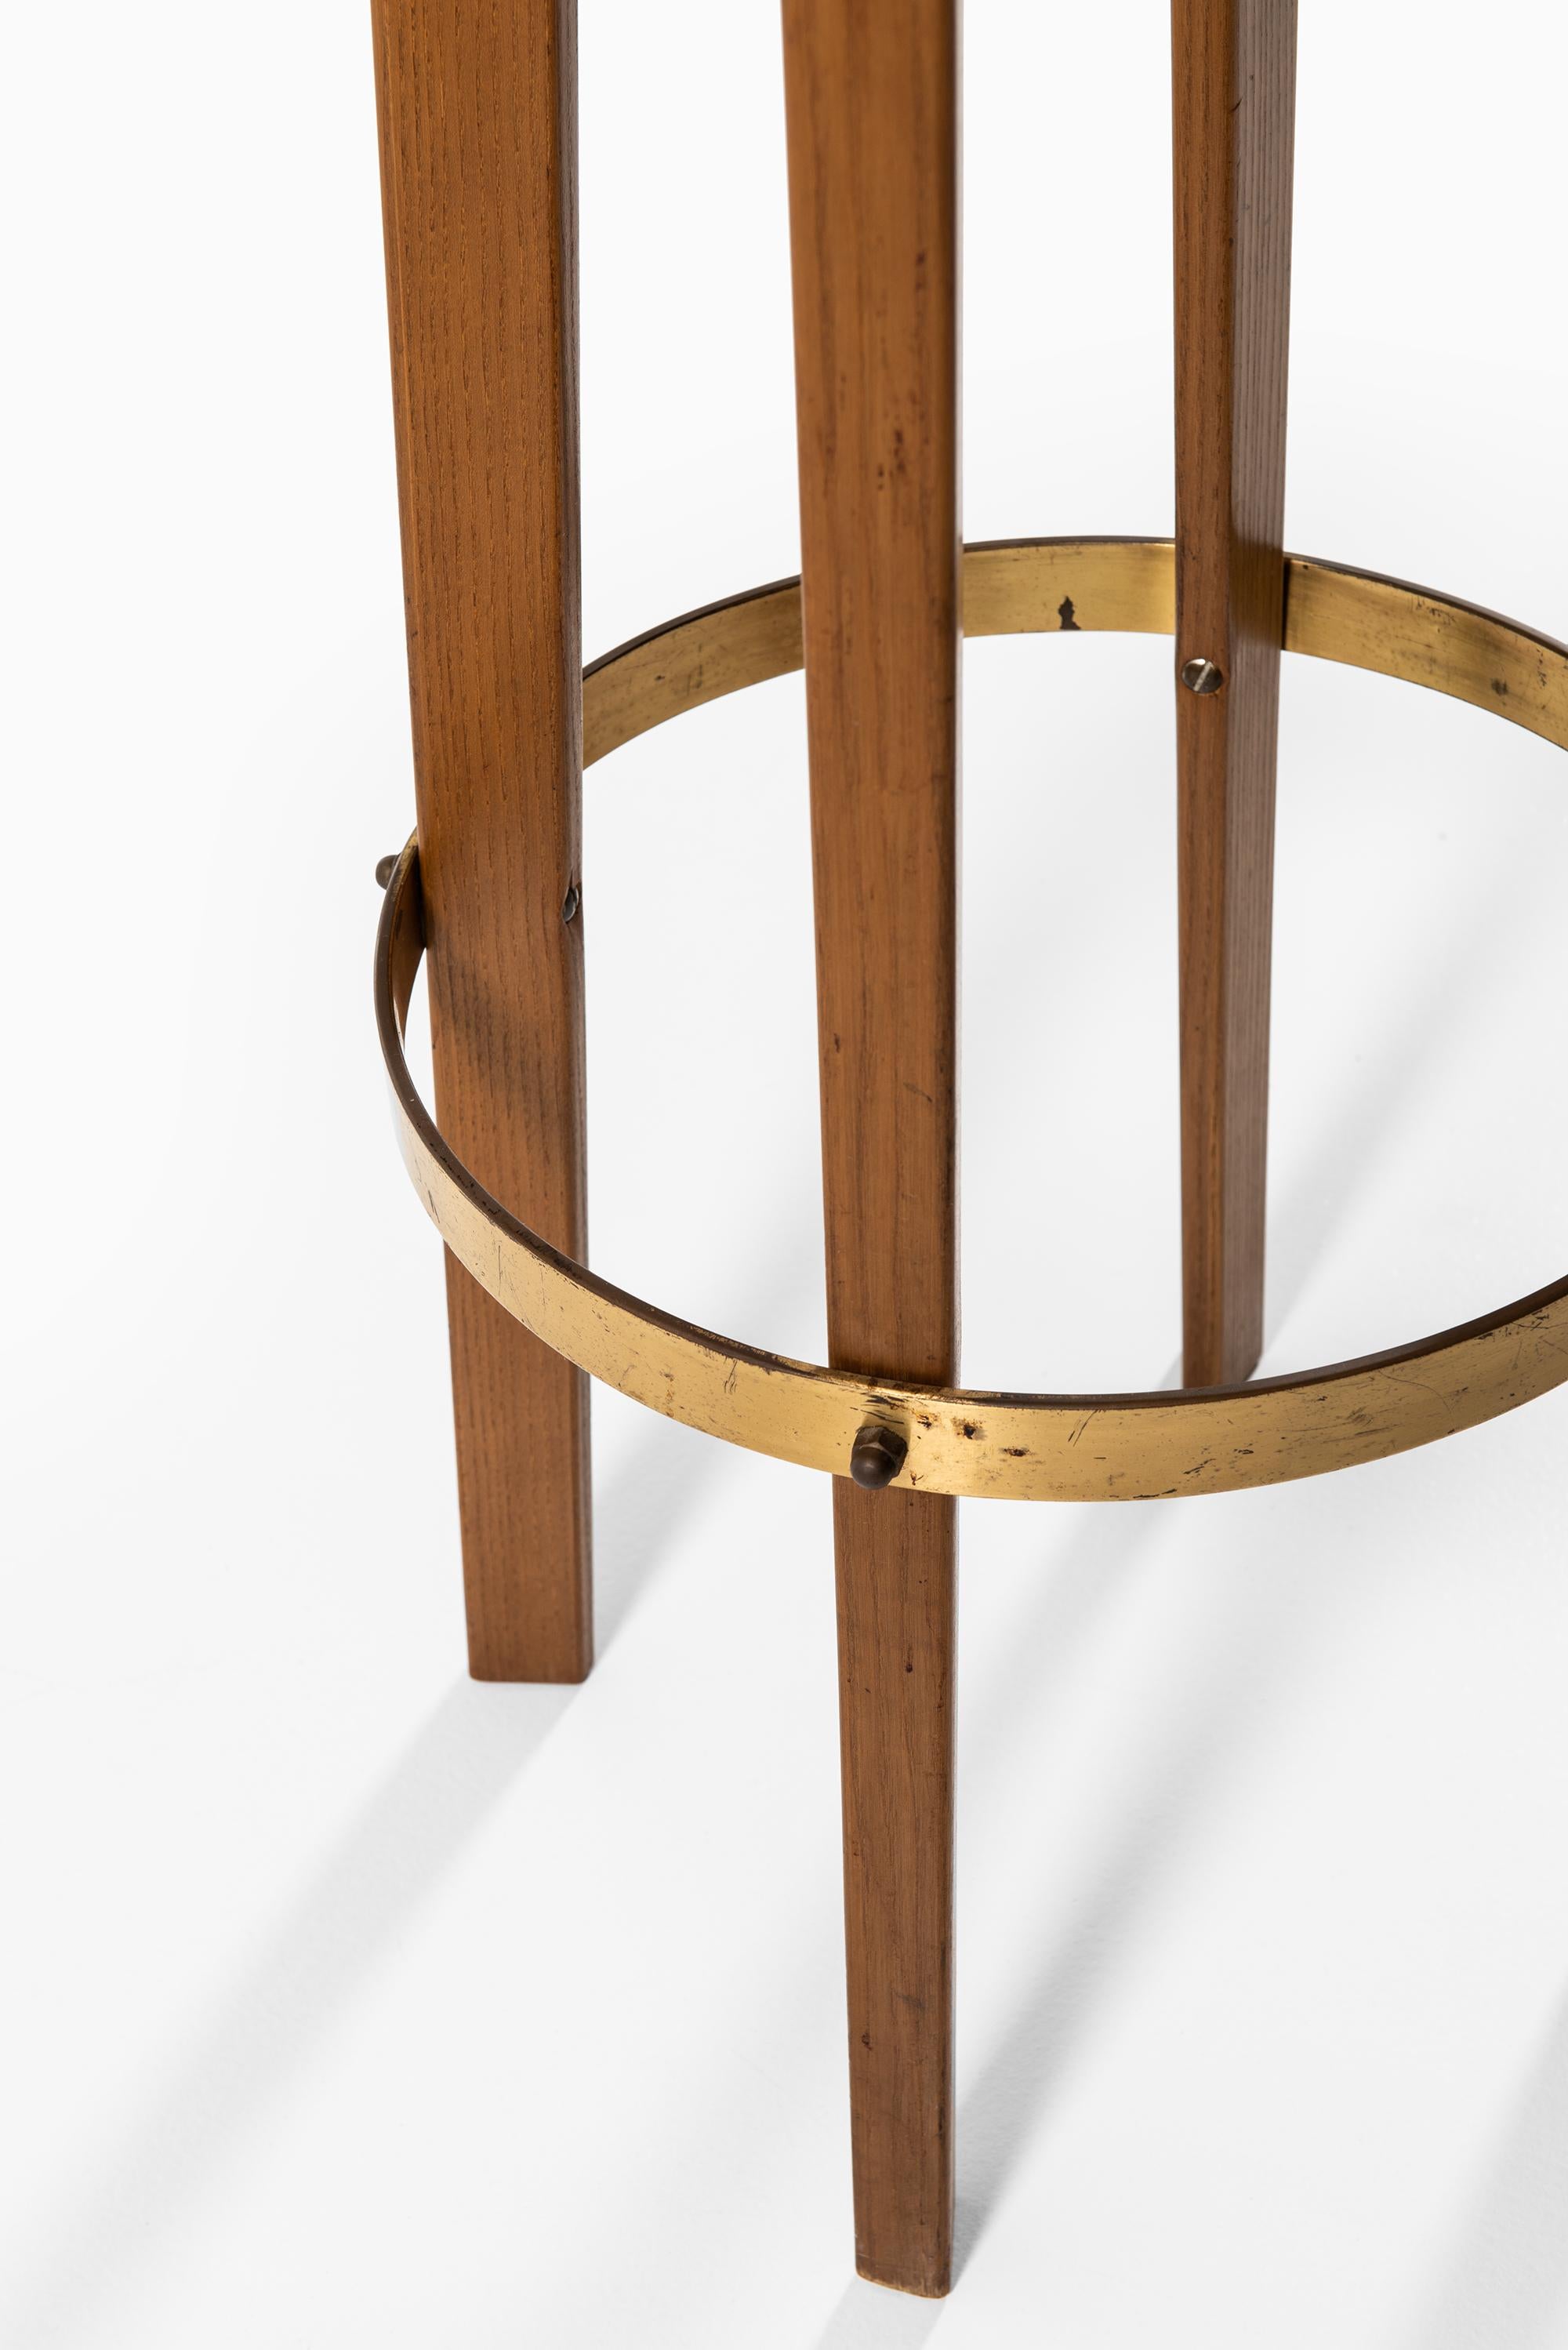 Scandinavian Modern Bar Stools in Teak, Brass and Leather Produced in Sweden